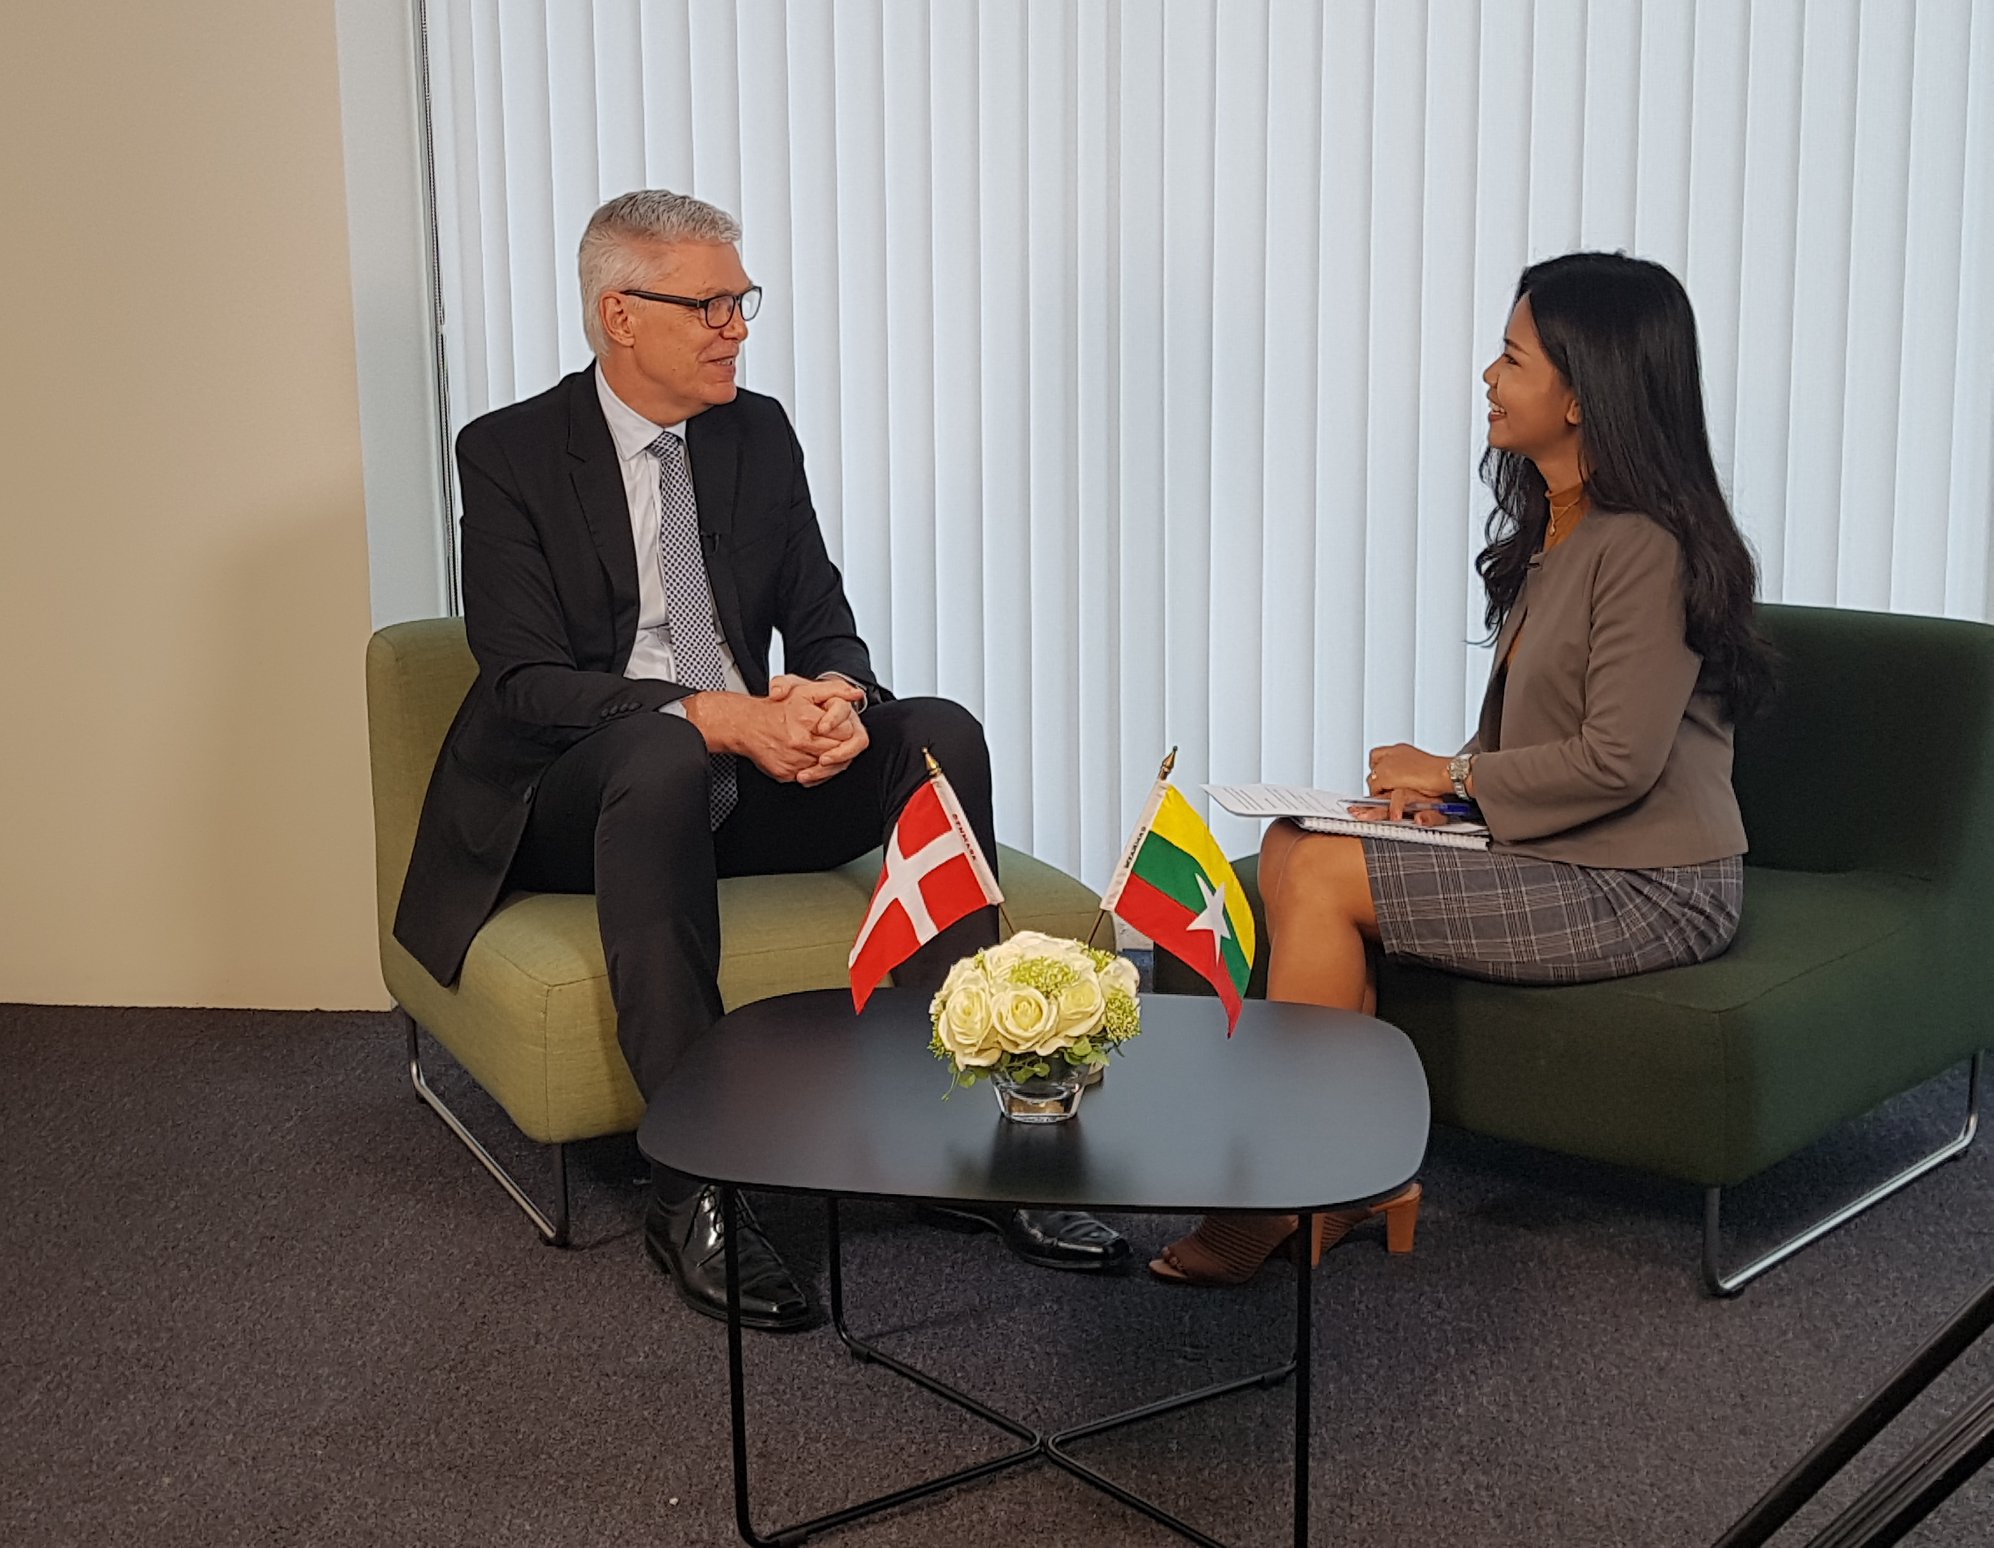 Danish ambassador to Myanmar on national television to send Christmas and New Year greetings